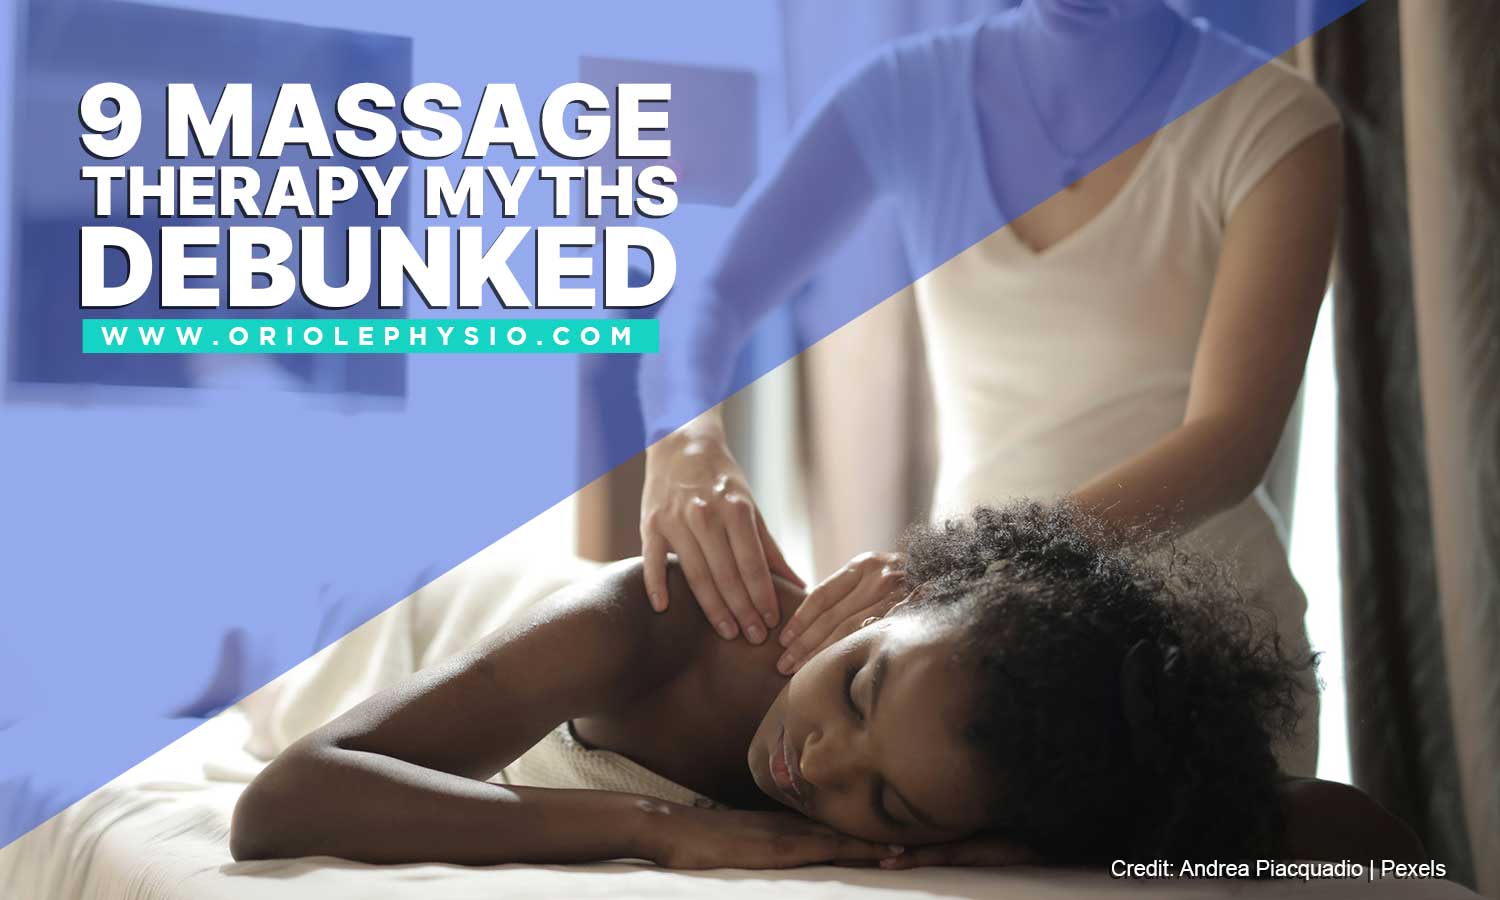 9 Massage Therapy Myths Debunked